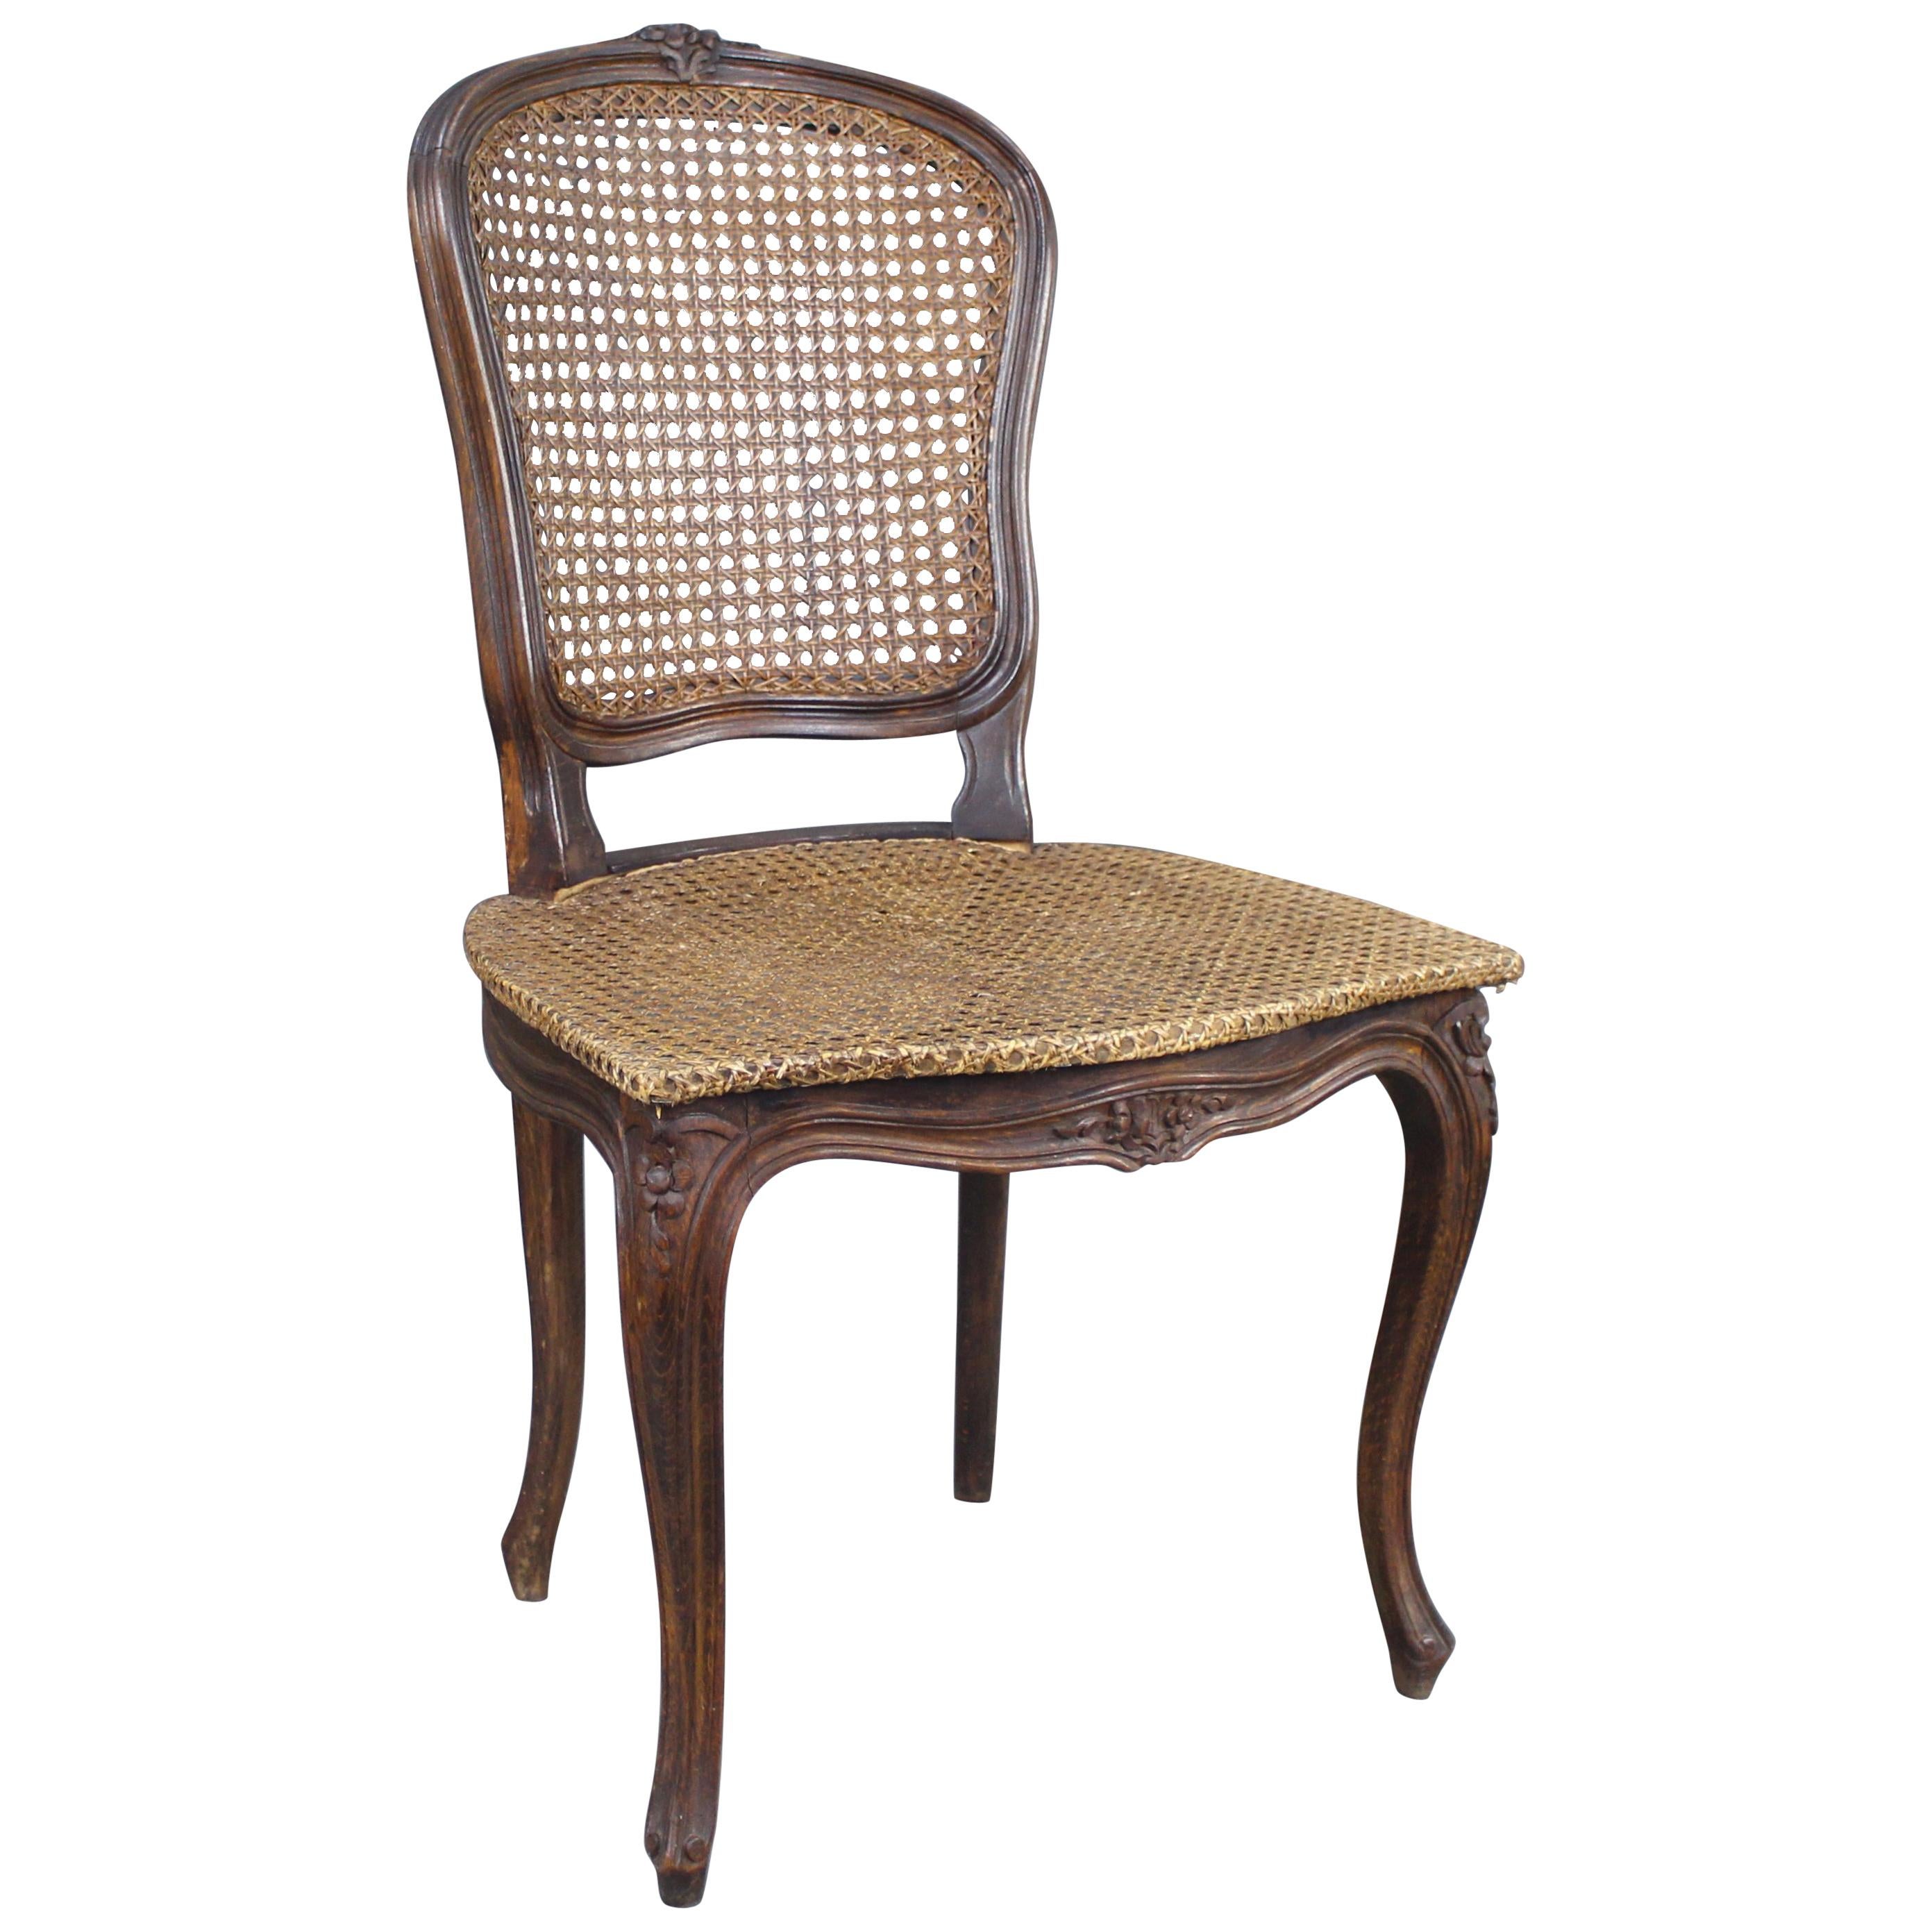 Early 19th Century French Beech Bergère Cane Salon Chair For Sale